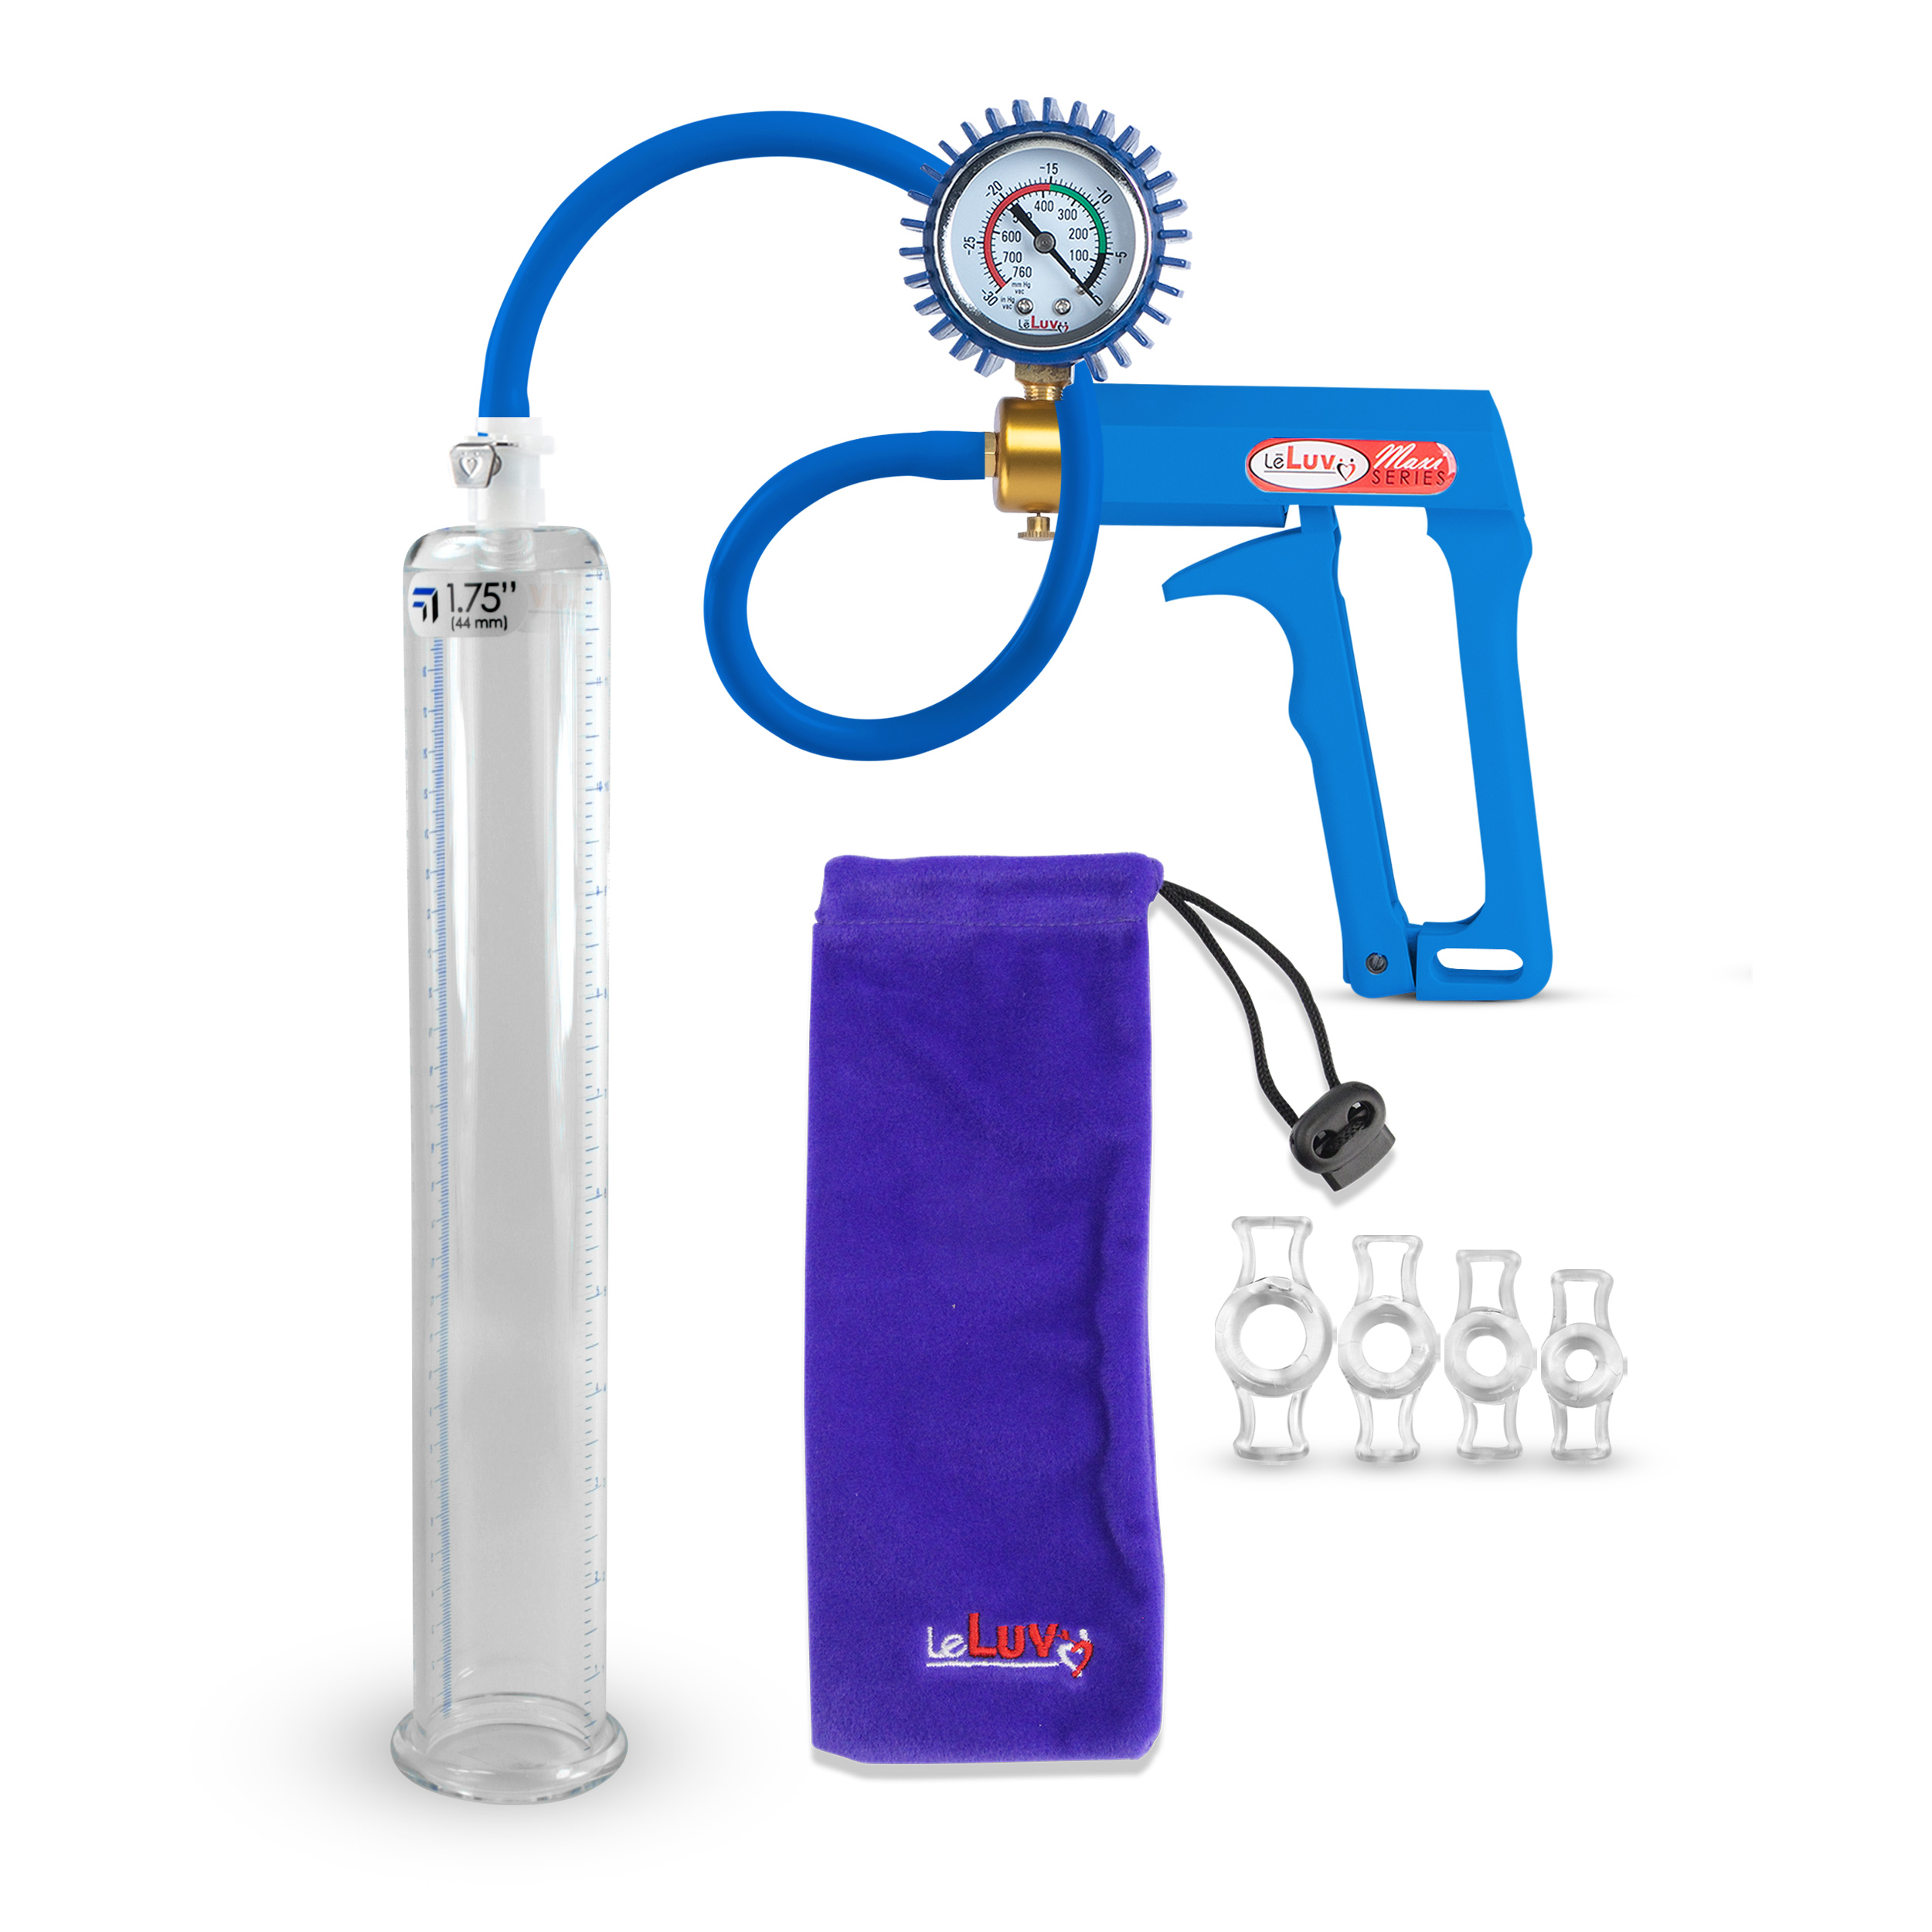 LeLuv MAXI, Gauge and Cover Premium Blue Penis Pump with Silicone Hose - 4 Constriction Rings - 12" x 1.75" Aid